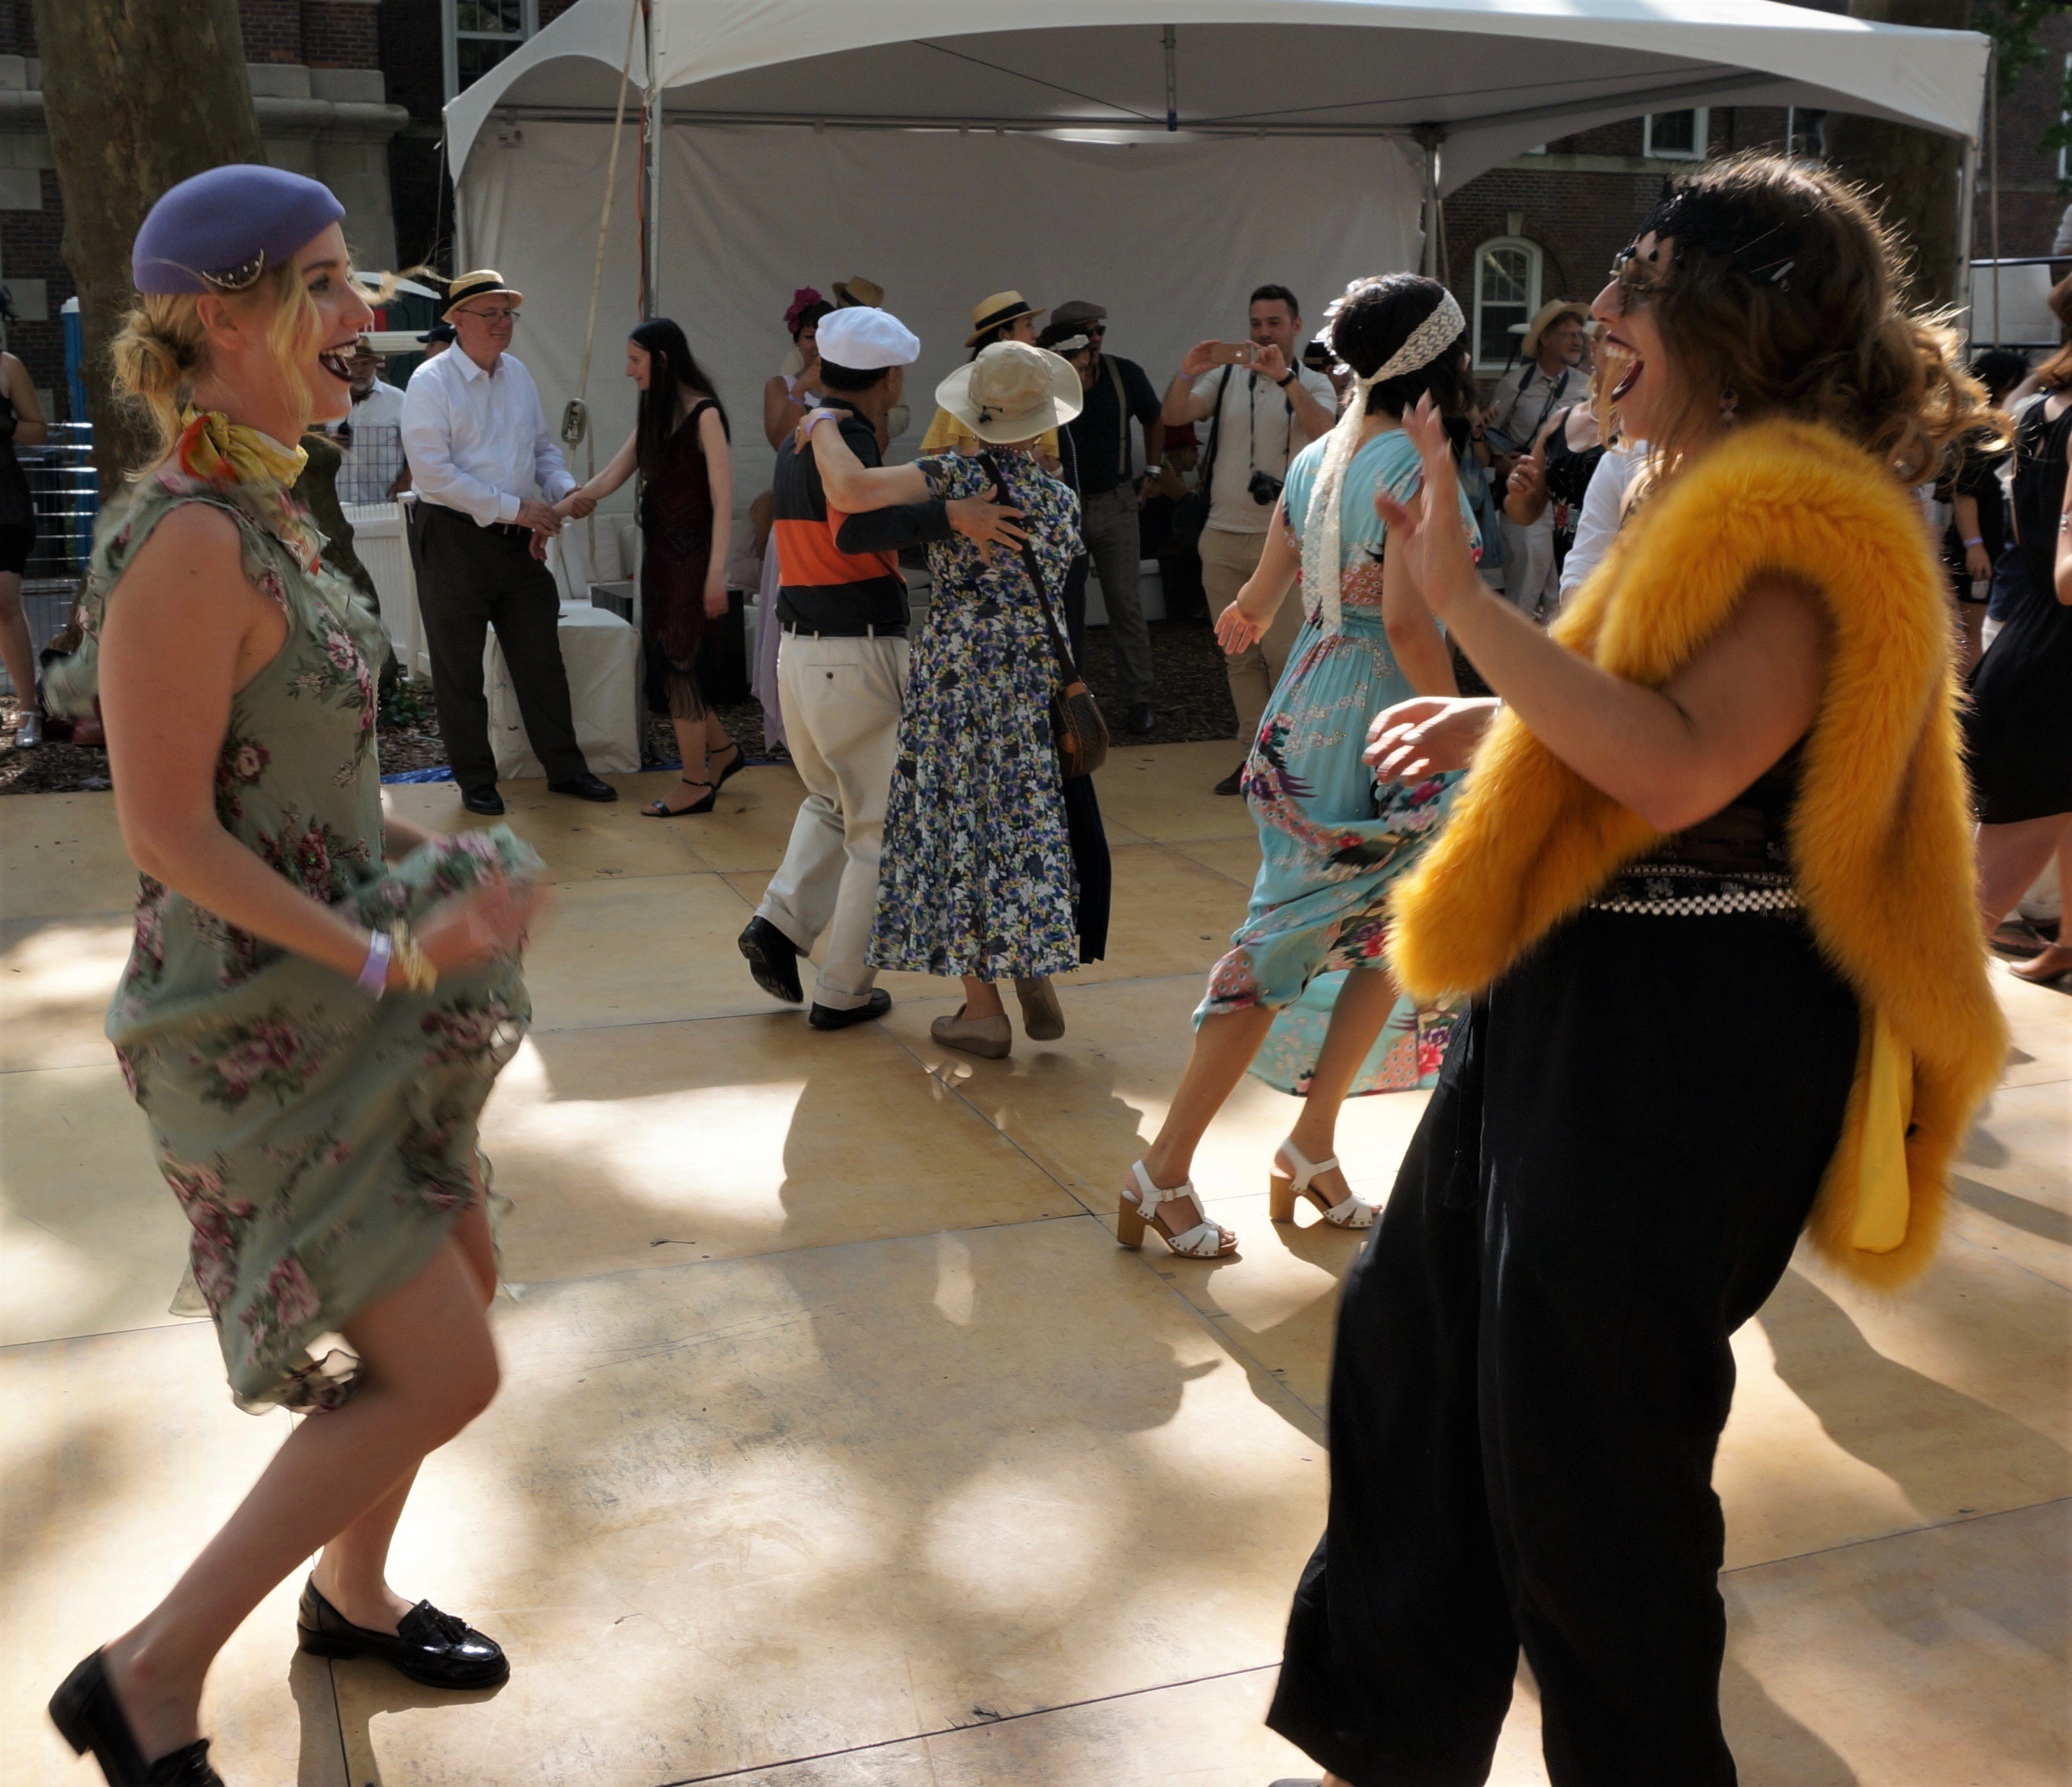 Music Fashion And A Grand Old Time At Nyc S Jazz Age Lawn Party 2018